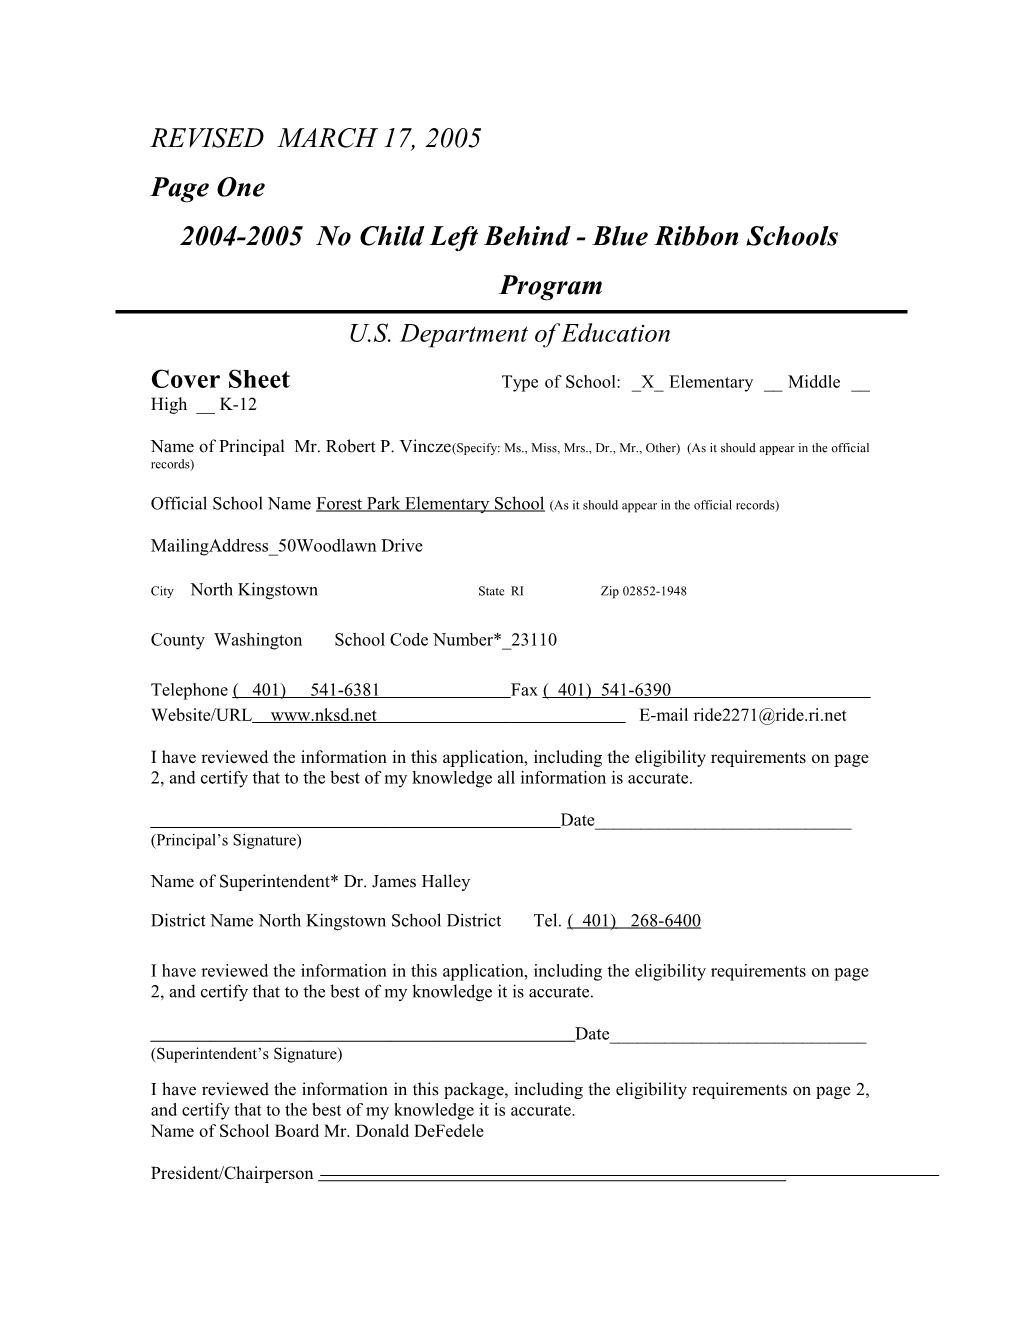 Forest Park Elementary School Application: 2004-2005, No Child Left Behind - Blue Ribbon